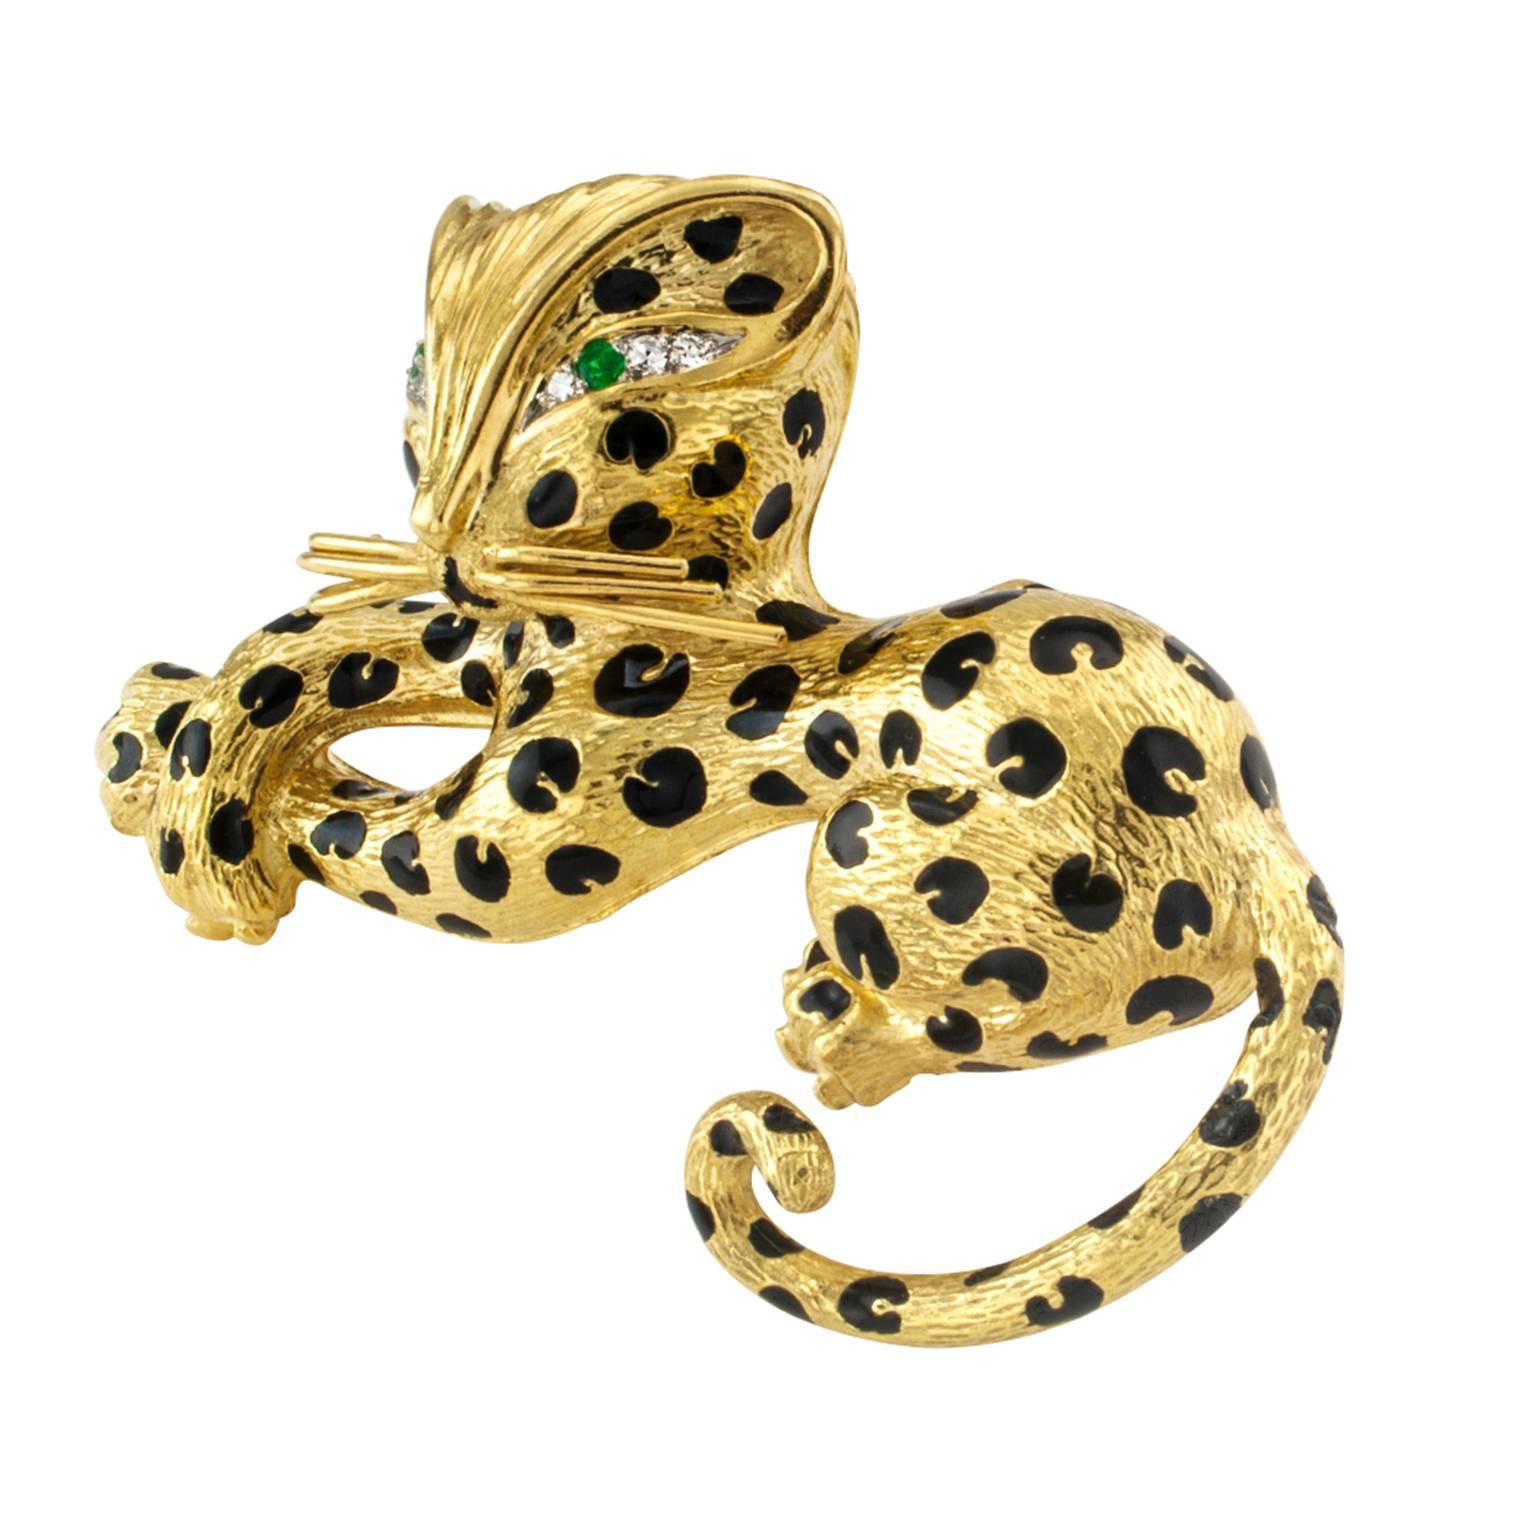 Contemporary Fred of Paris Whimsical Enamel gold Leopard Brooch